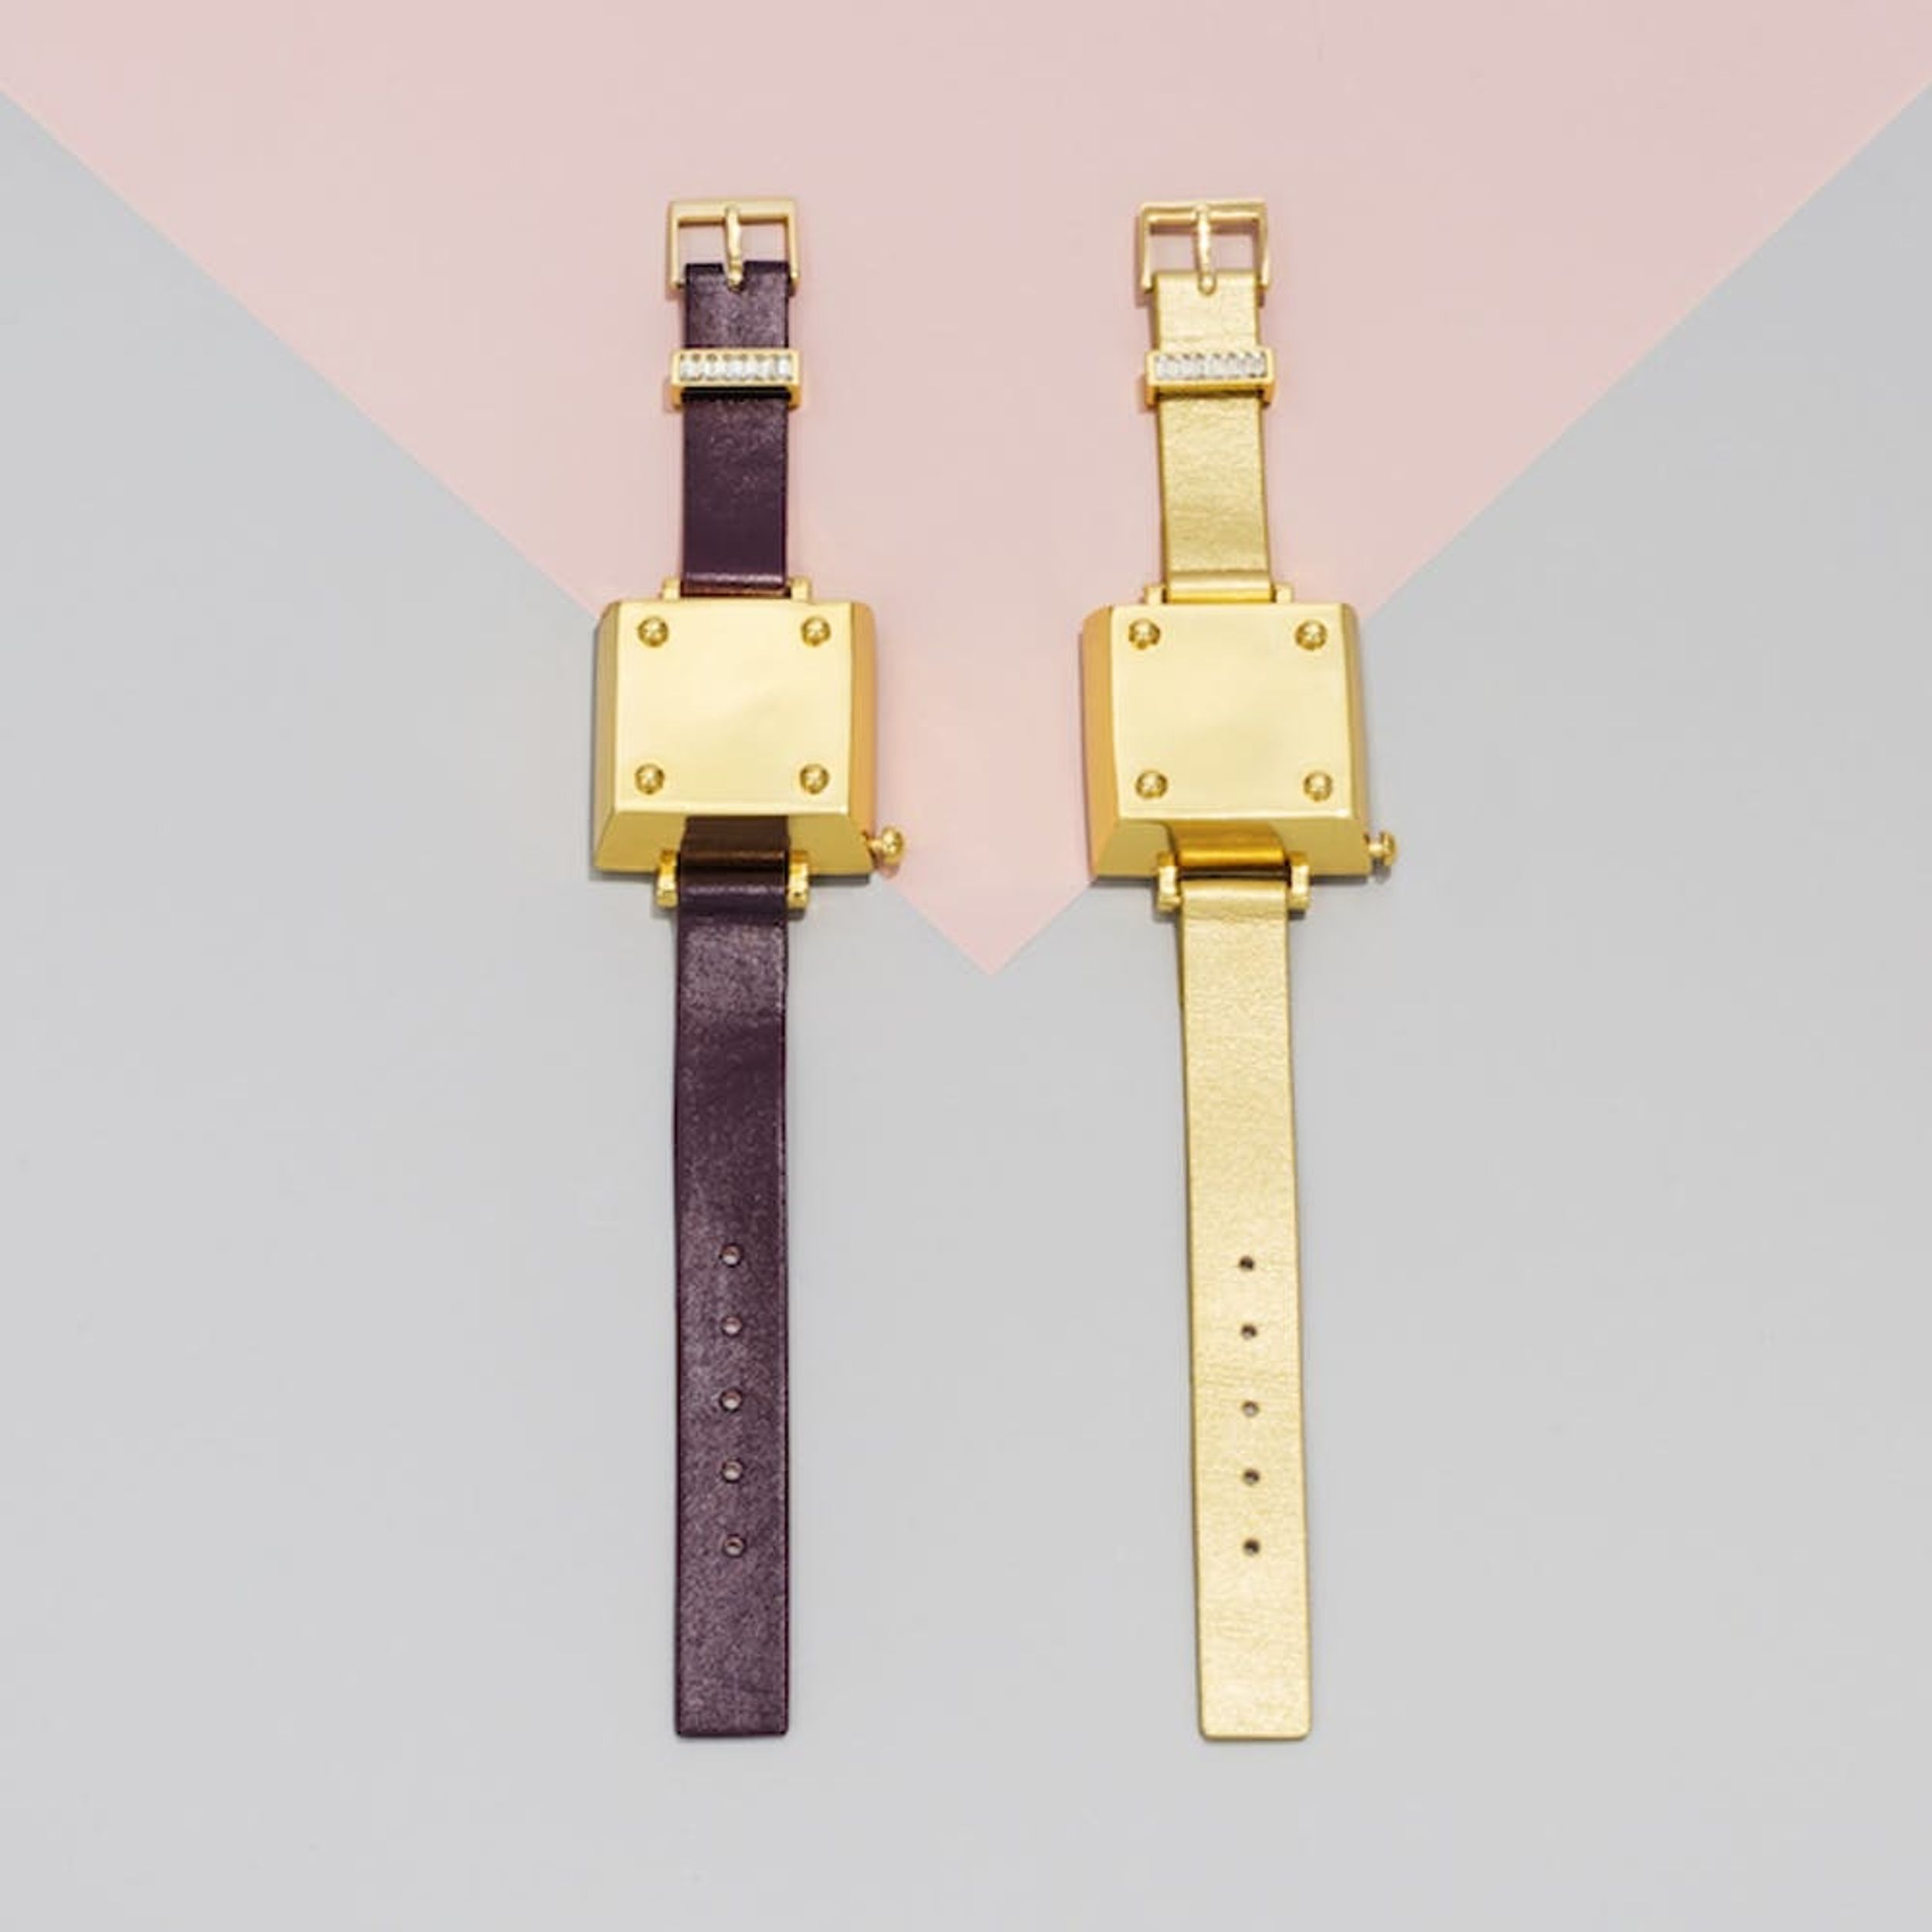 Your Fave Online Jewelry Store Is Going Into Wearable Tech